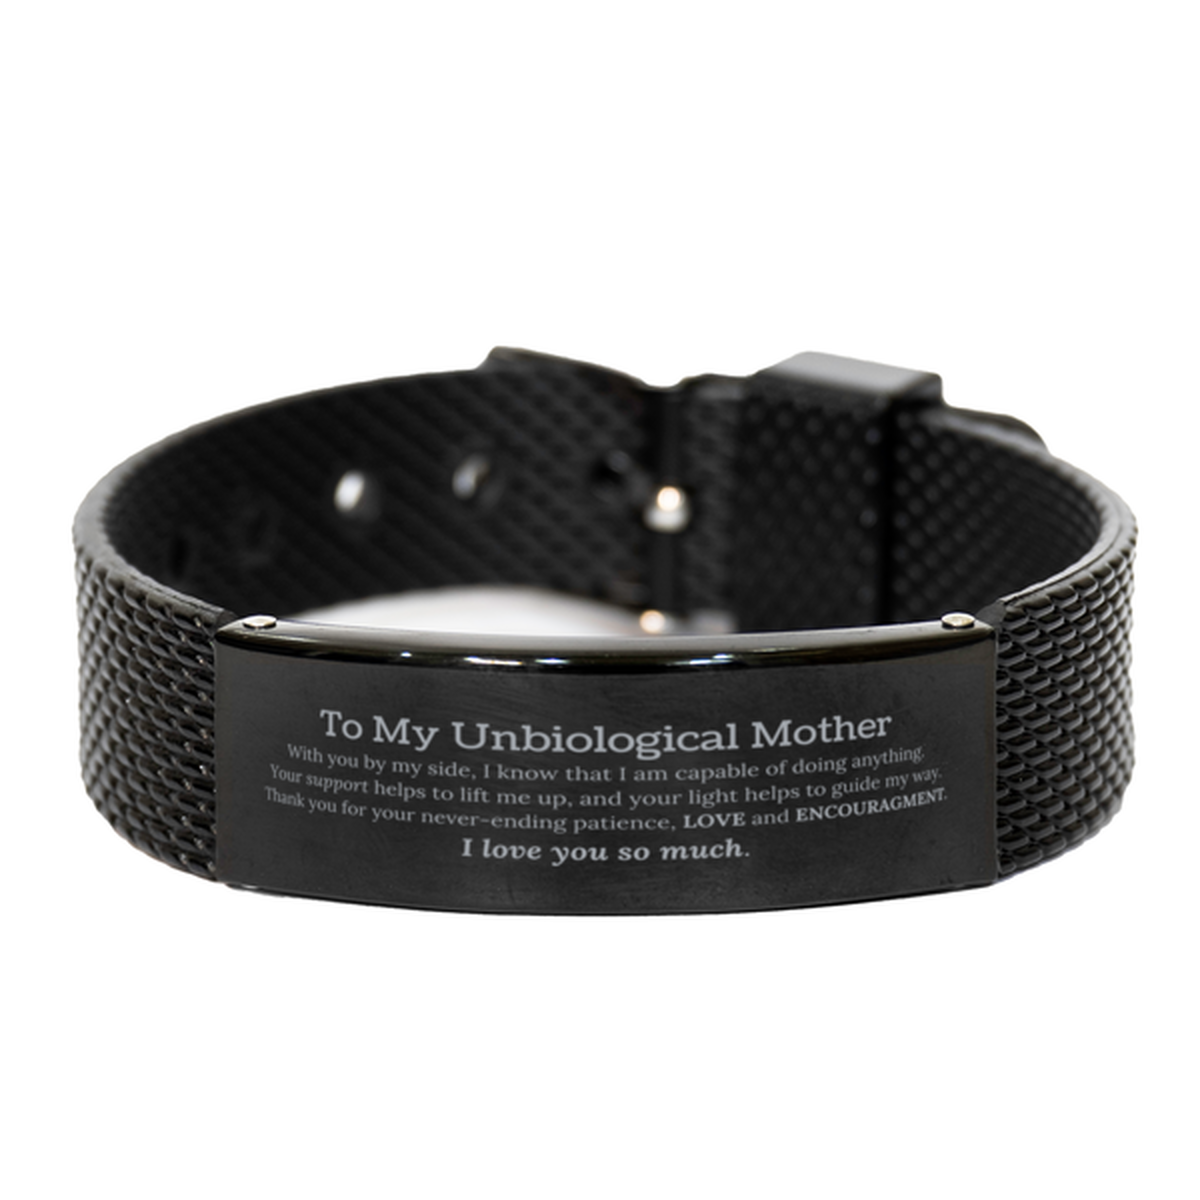 Appreciation Unbiological Mother Black Shark Mesh Bracelet Gifts, To My Unbiological Mother Birthday Christmas Wedding Keepsake Gifts for Unbiological Mother With you by my side, I know that I am capable of doing anything. I love you so much